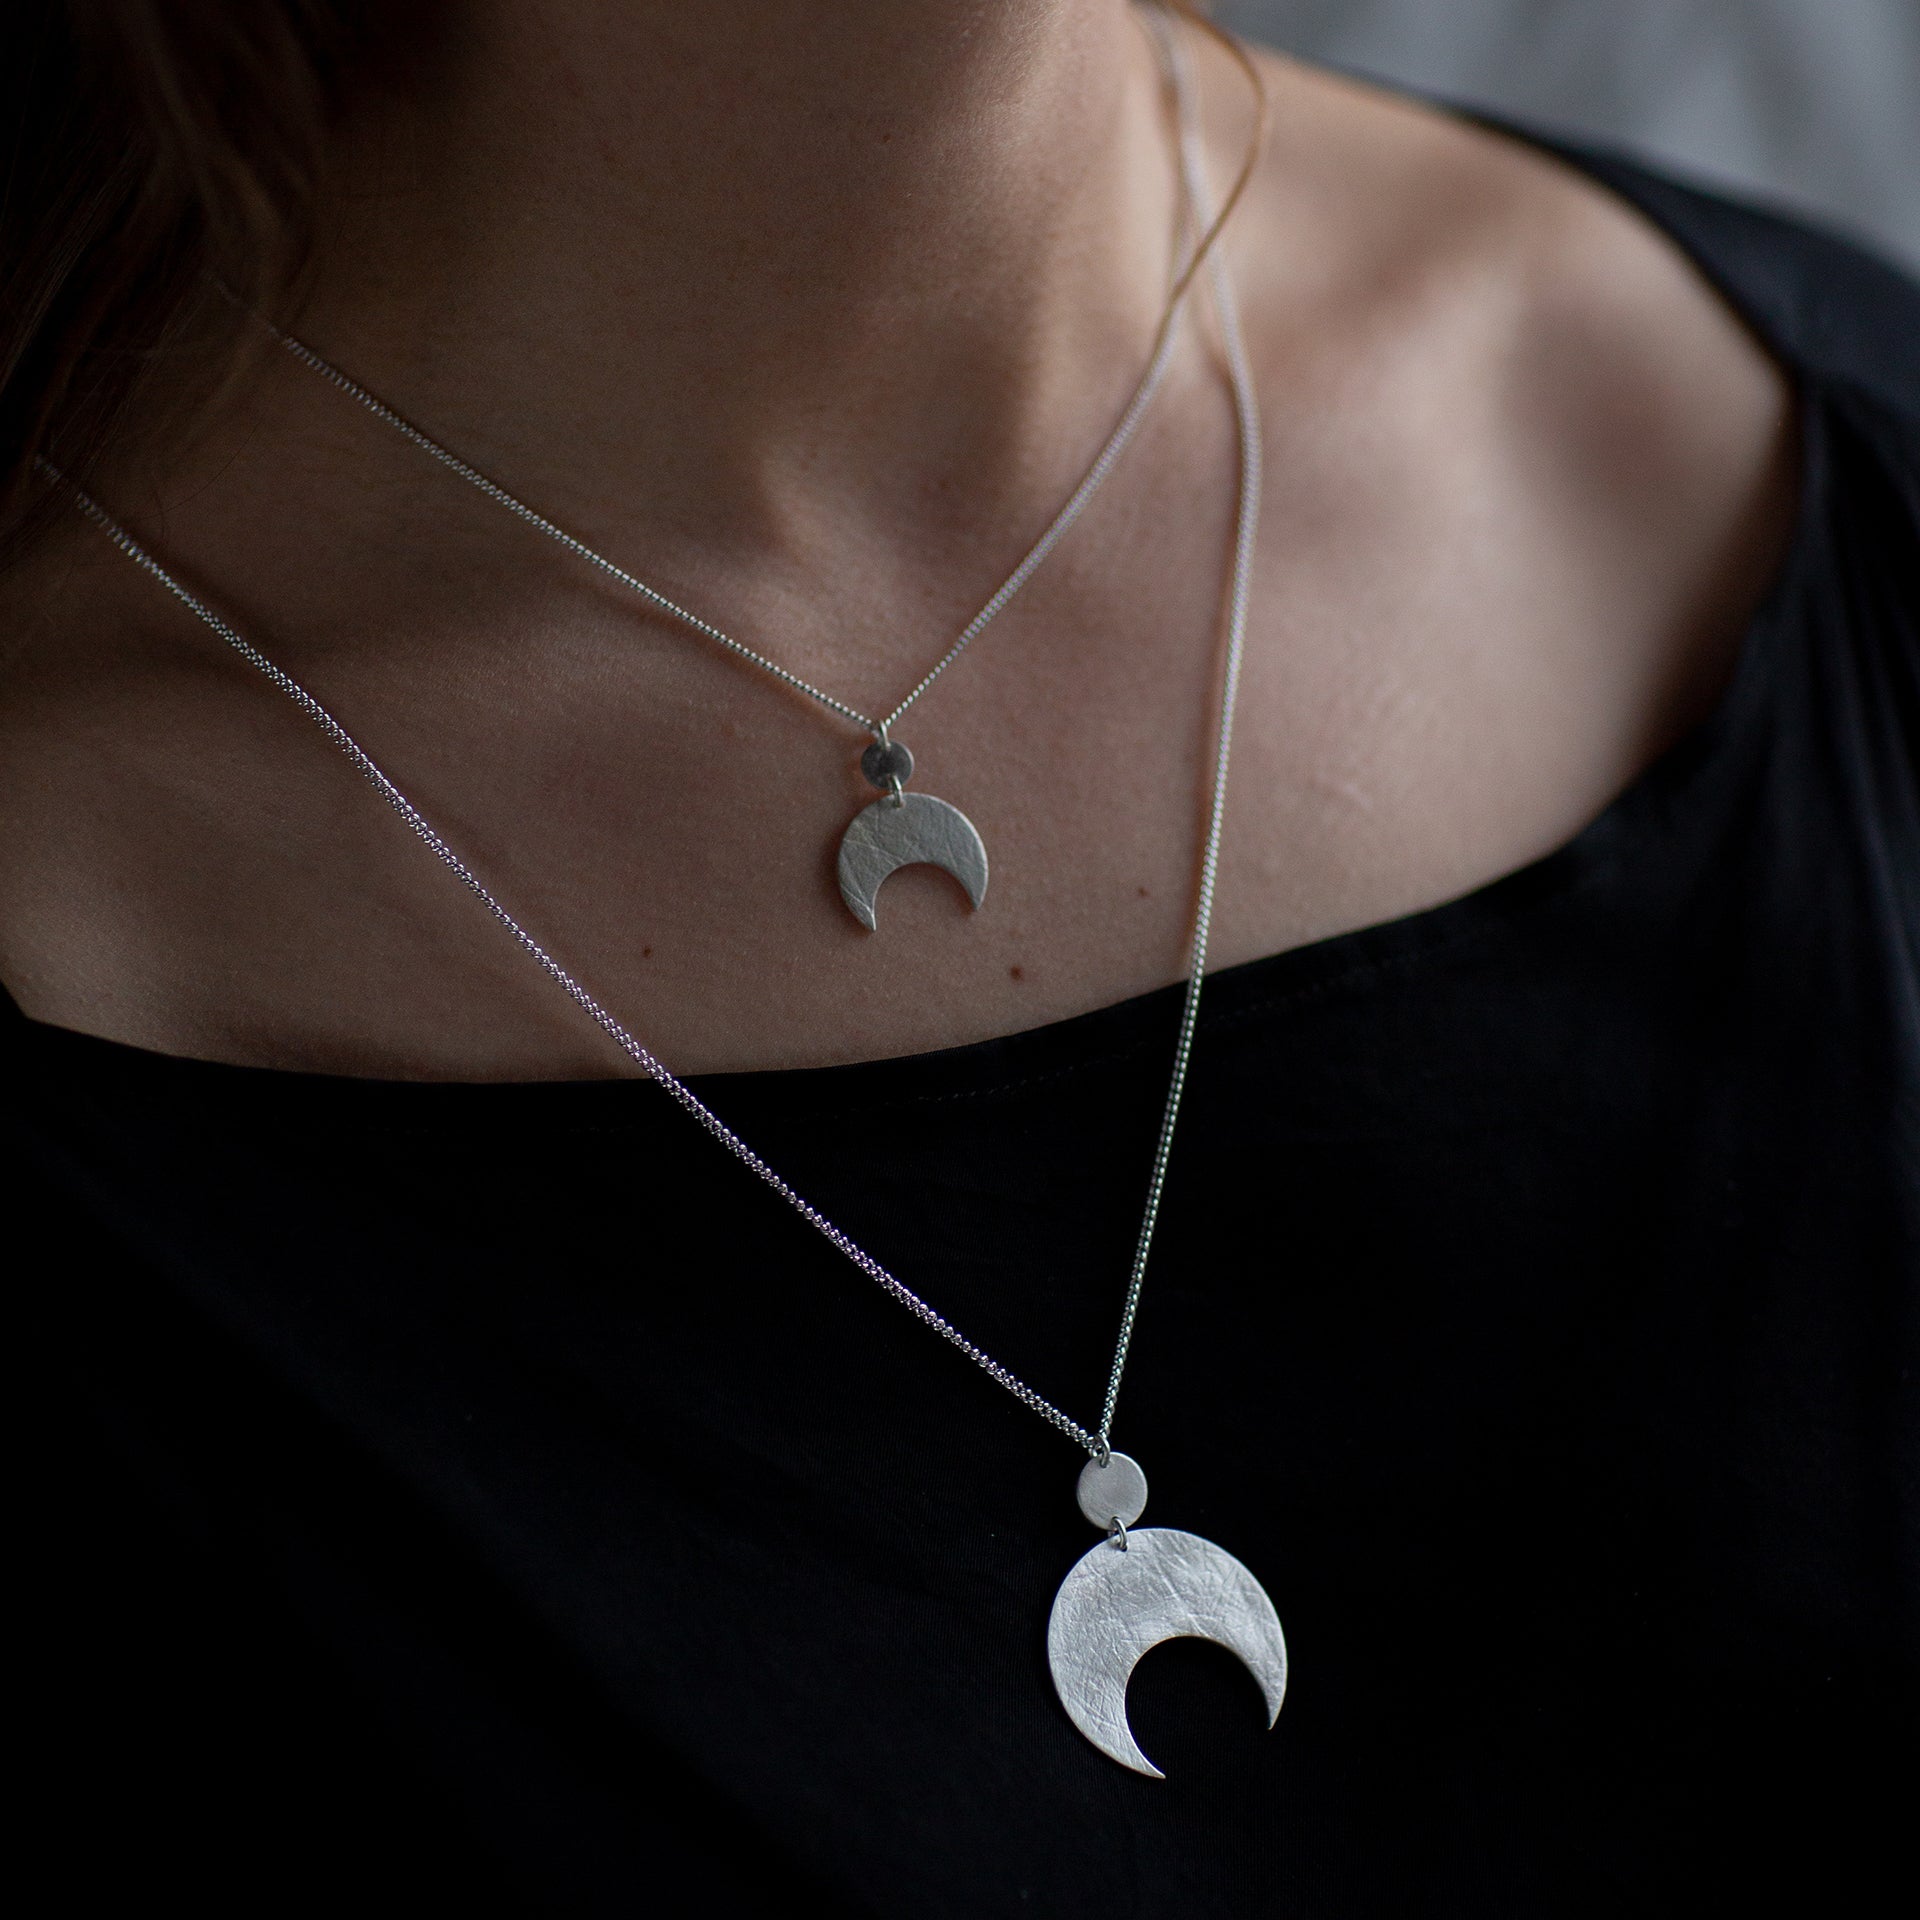 Emily Eliza Arlotte Handcrafted Fine Jewellery - Handmade Australian Tasmanian Jewelry Ethically Made Sustainable Recycled Sterling Silver Charm Necklace Half Moon Crescent Celestial Goddess Pendant Contemporary Dainty Statement Unique Trendy Modern Necklace Boho Bohemian Gypsy Witchy Alternative Style Festival Fashion